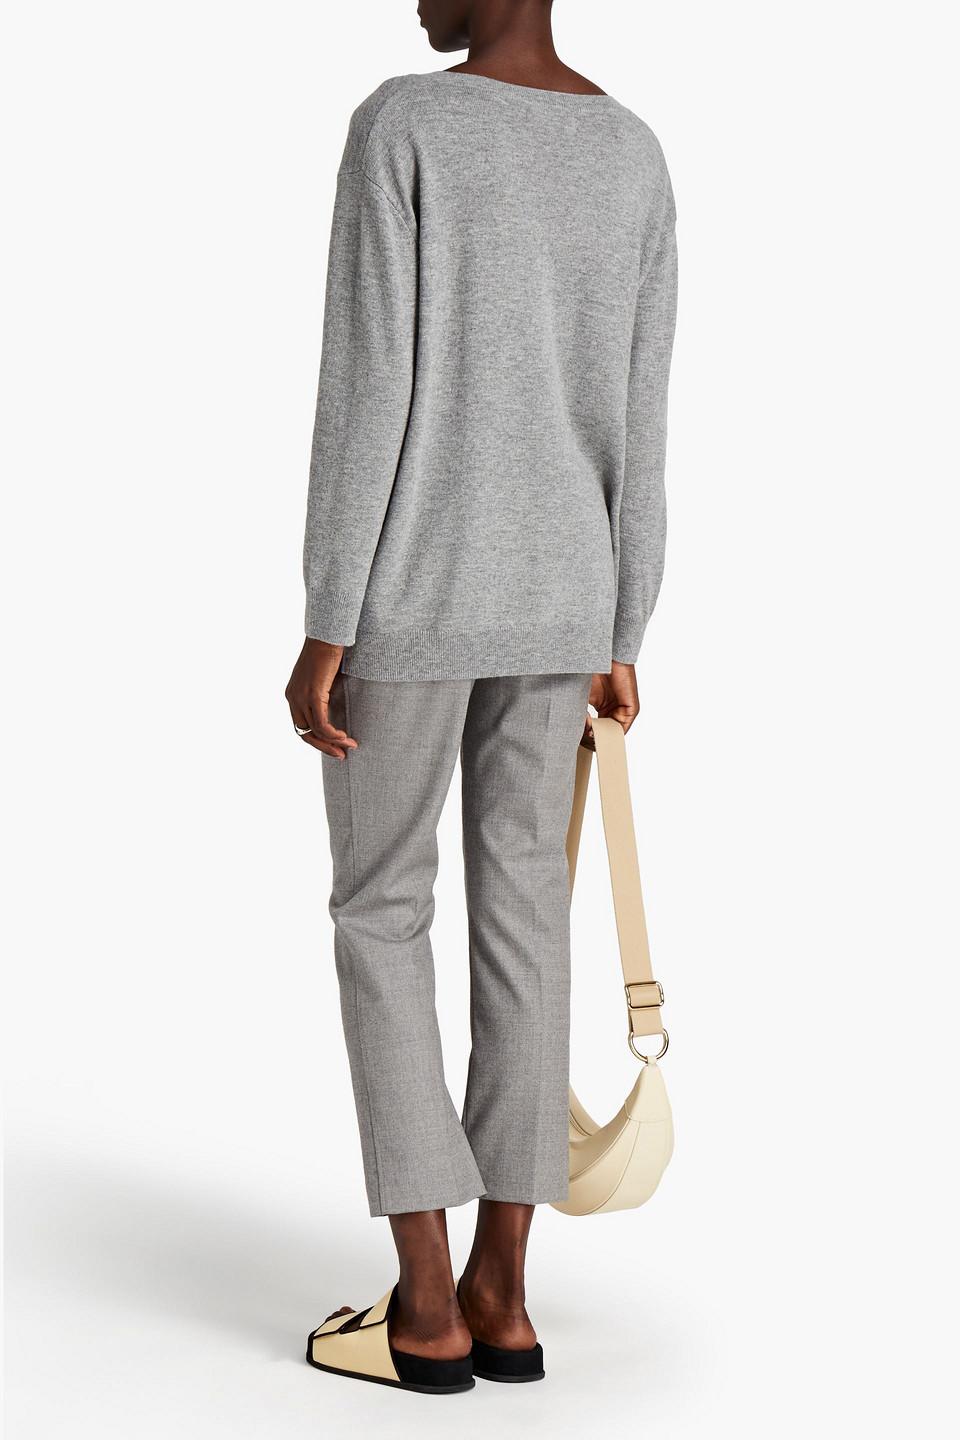 Chinti & Parker Striped Wool And Cashmere-blend Sweater in Gray | Lyst